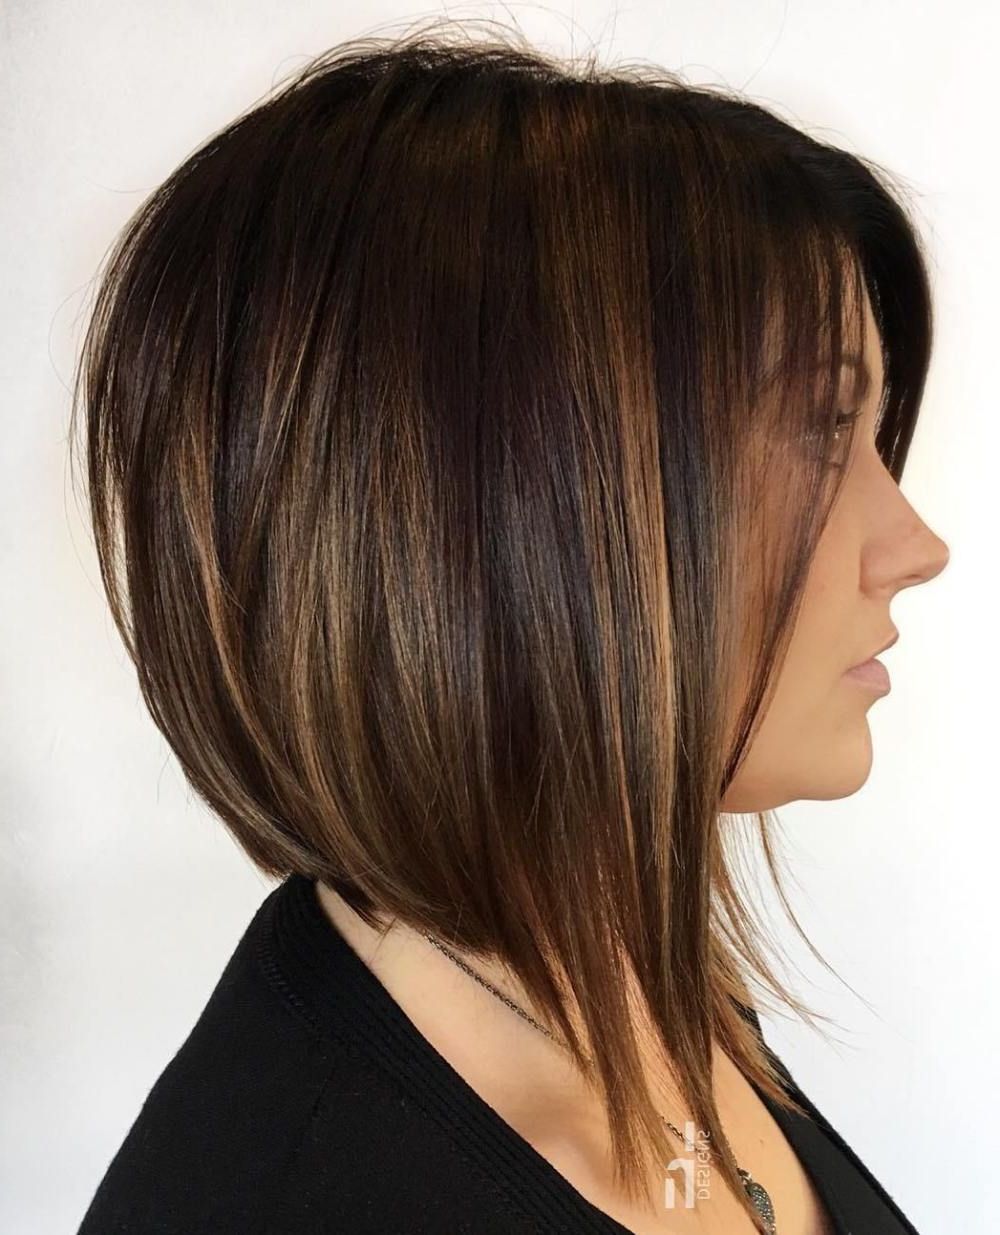 60 Chocolate Brown Hair Color Ideas For Brunettes In 2018 | Hair Pertaining To Straight Cut Bob Hairstyles With Layers And Subtle Highlights (View 13 of 20)